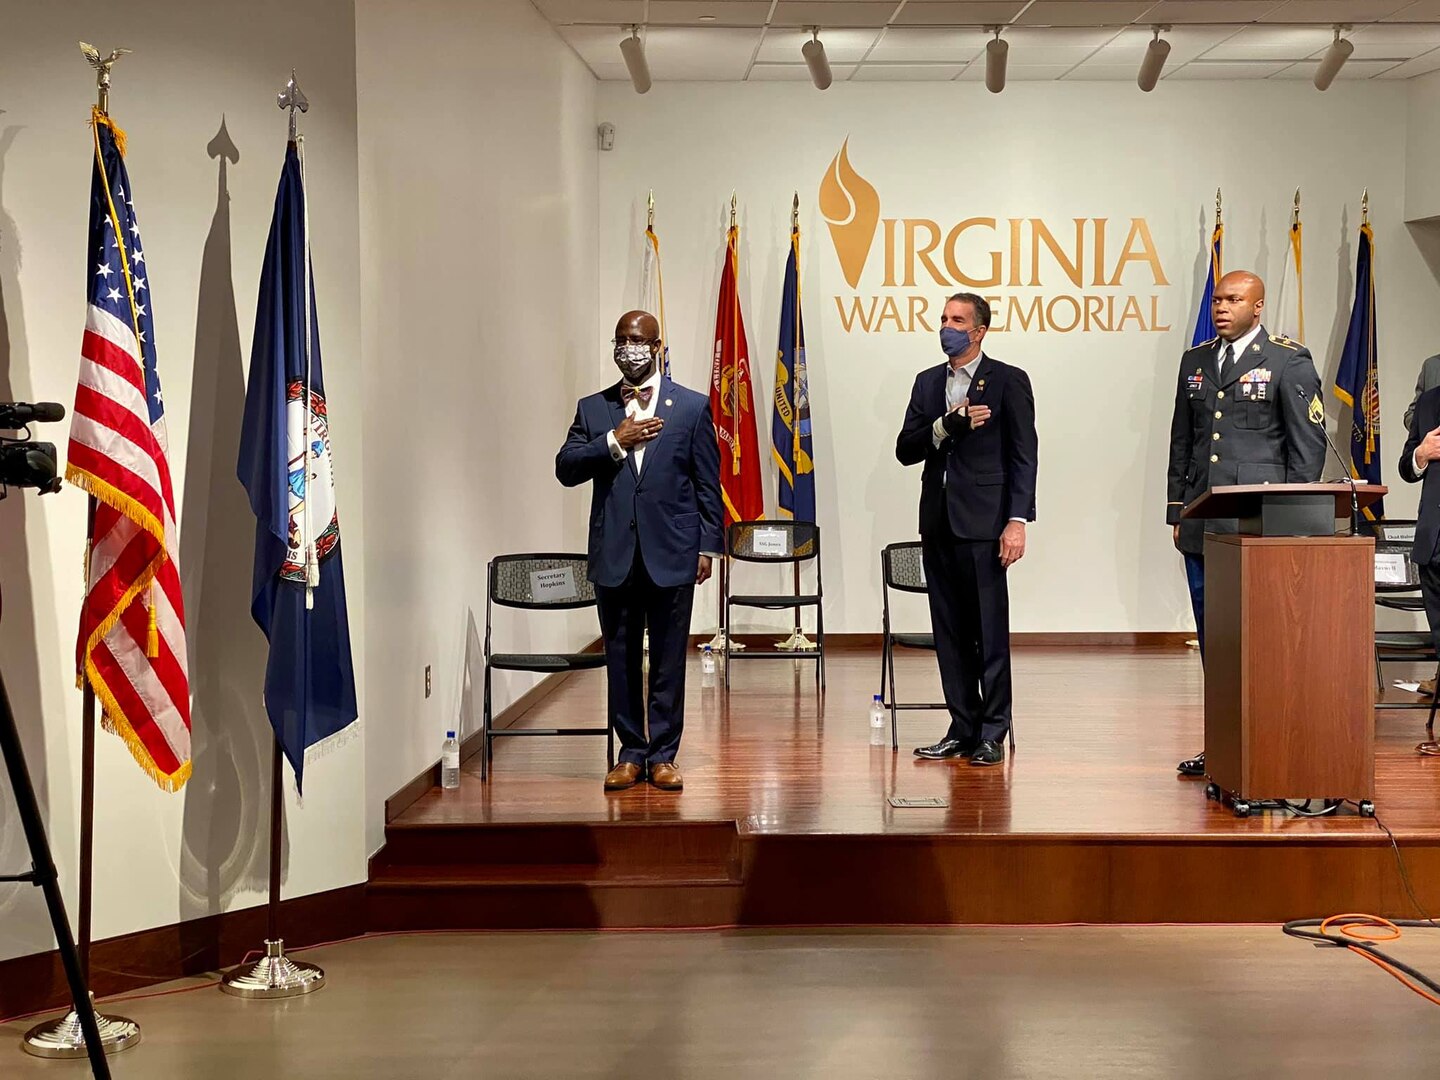 Staff Sgt. Eddie B. Jones leads the Pledge of Allegiance at the 64th annual Commonwealth’s Veterans Day Ceremony Nov. 11, 2020, at the Virginia War Memorial in Richmond, Virginia.